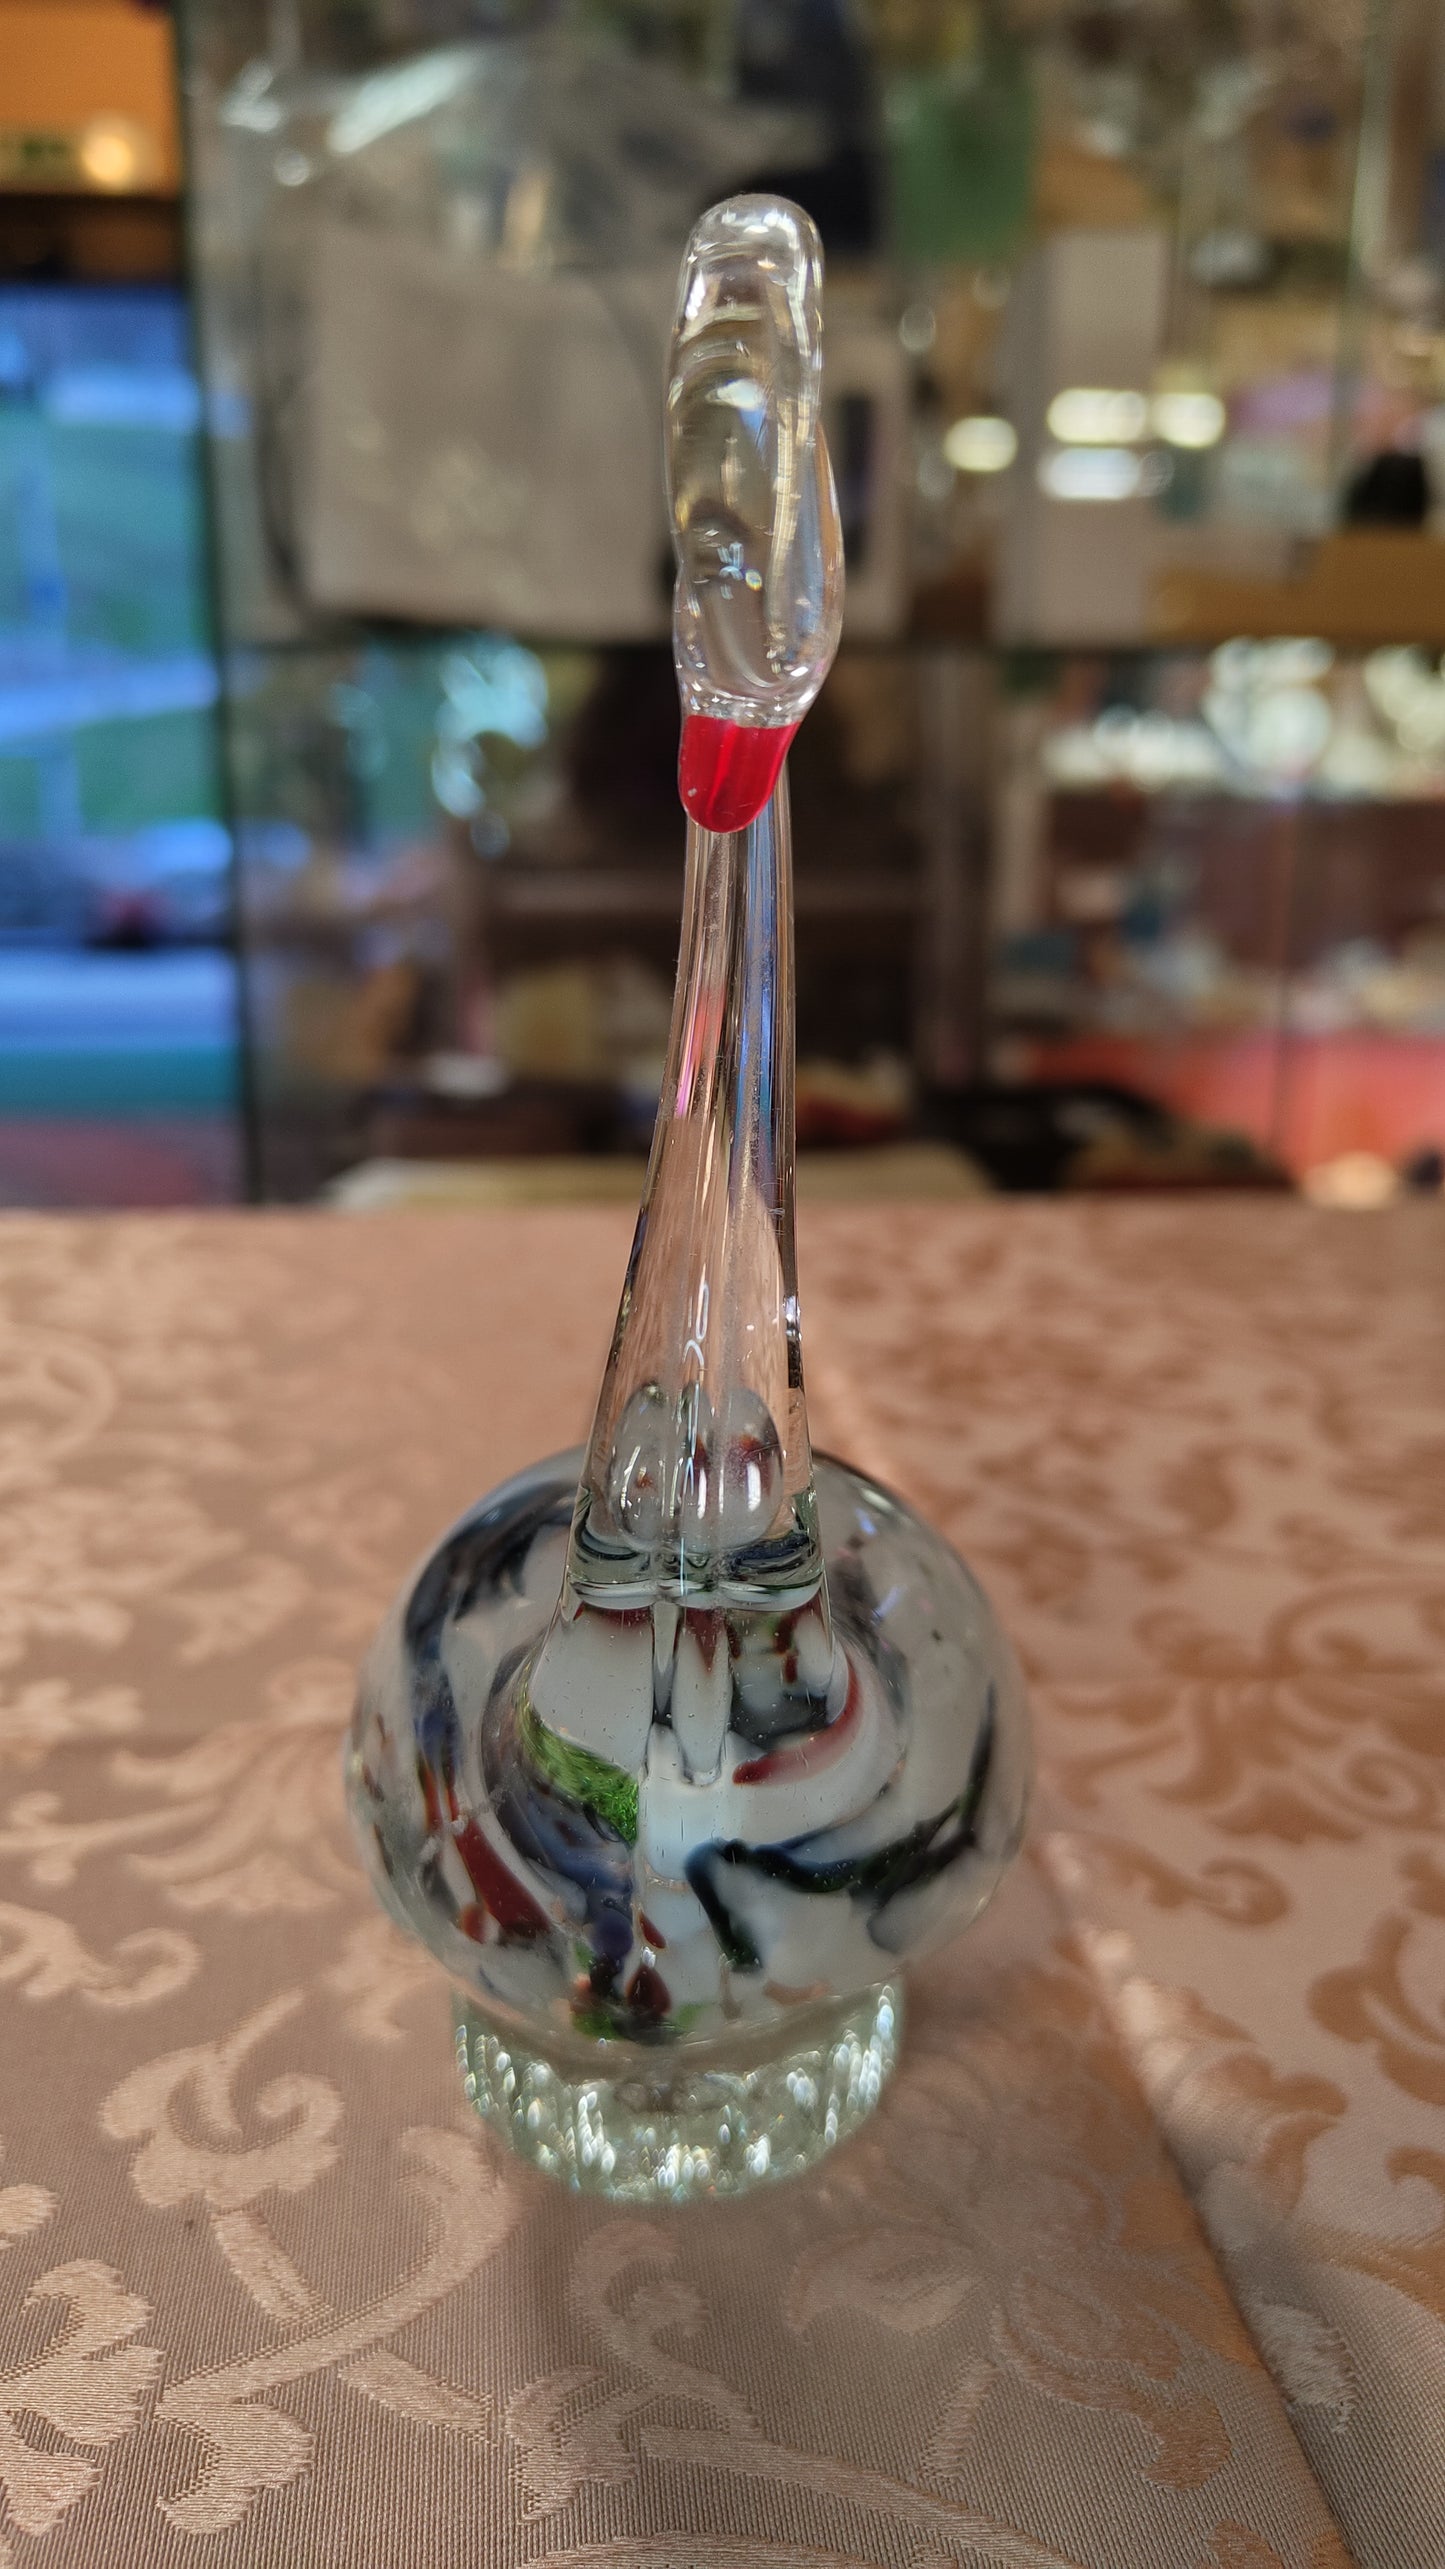 Swan in Murano glass with white, black, red and blue interior